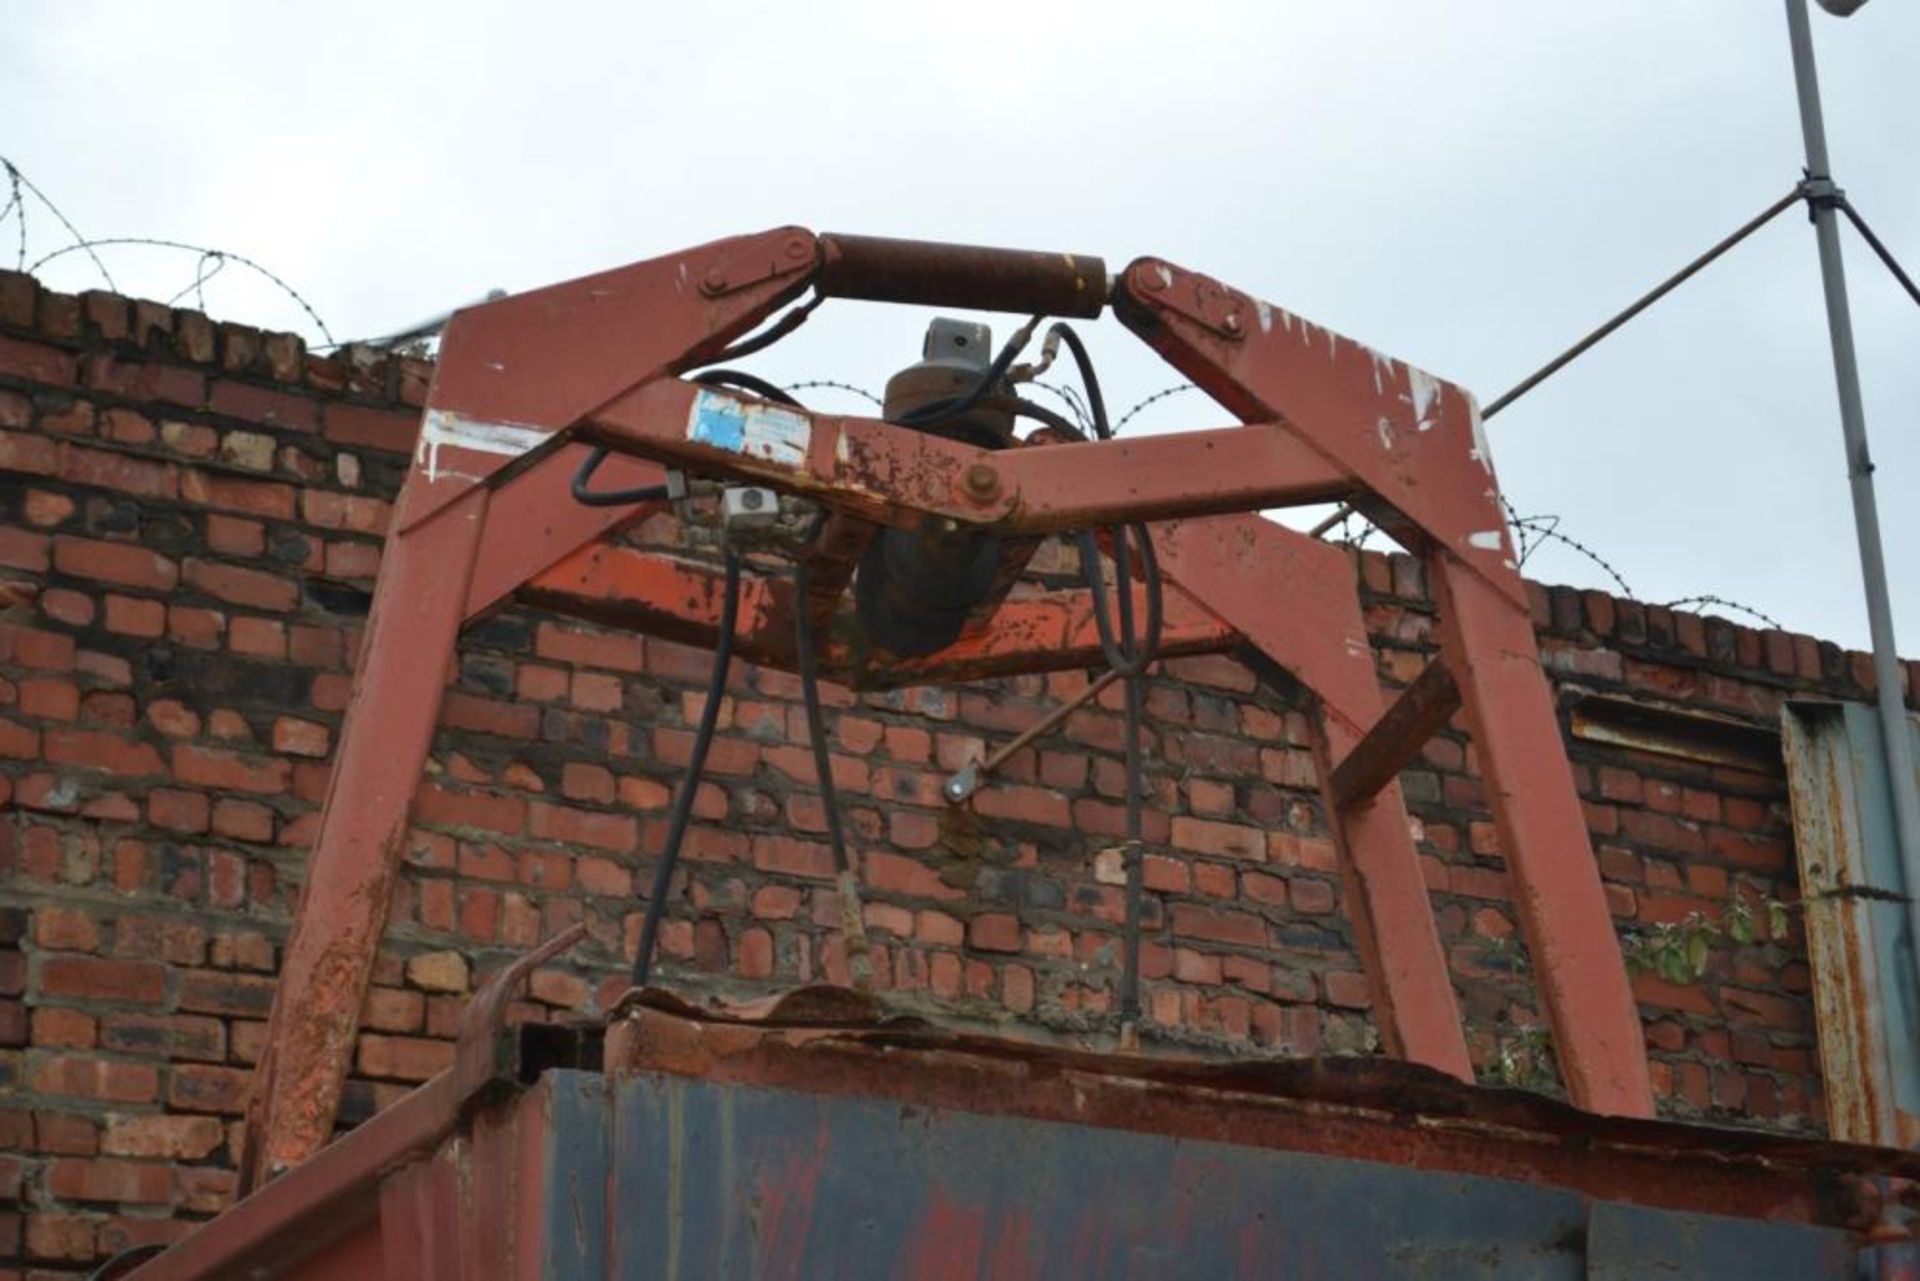 1 x Industrial Palfinger 450GF Grapple Claw - CL464 - Location:Liverpool L19 - Used - Image 15 of 19